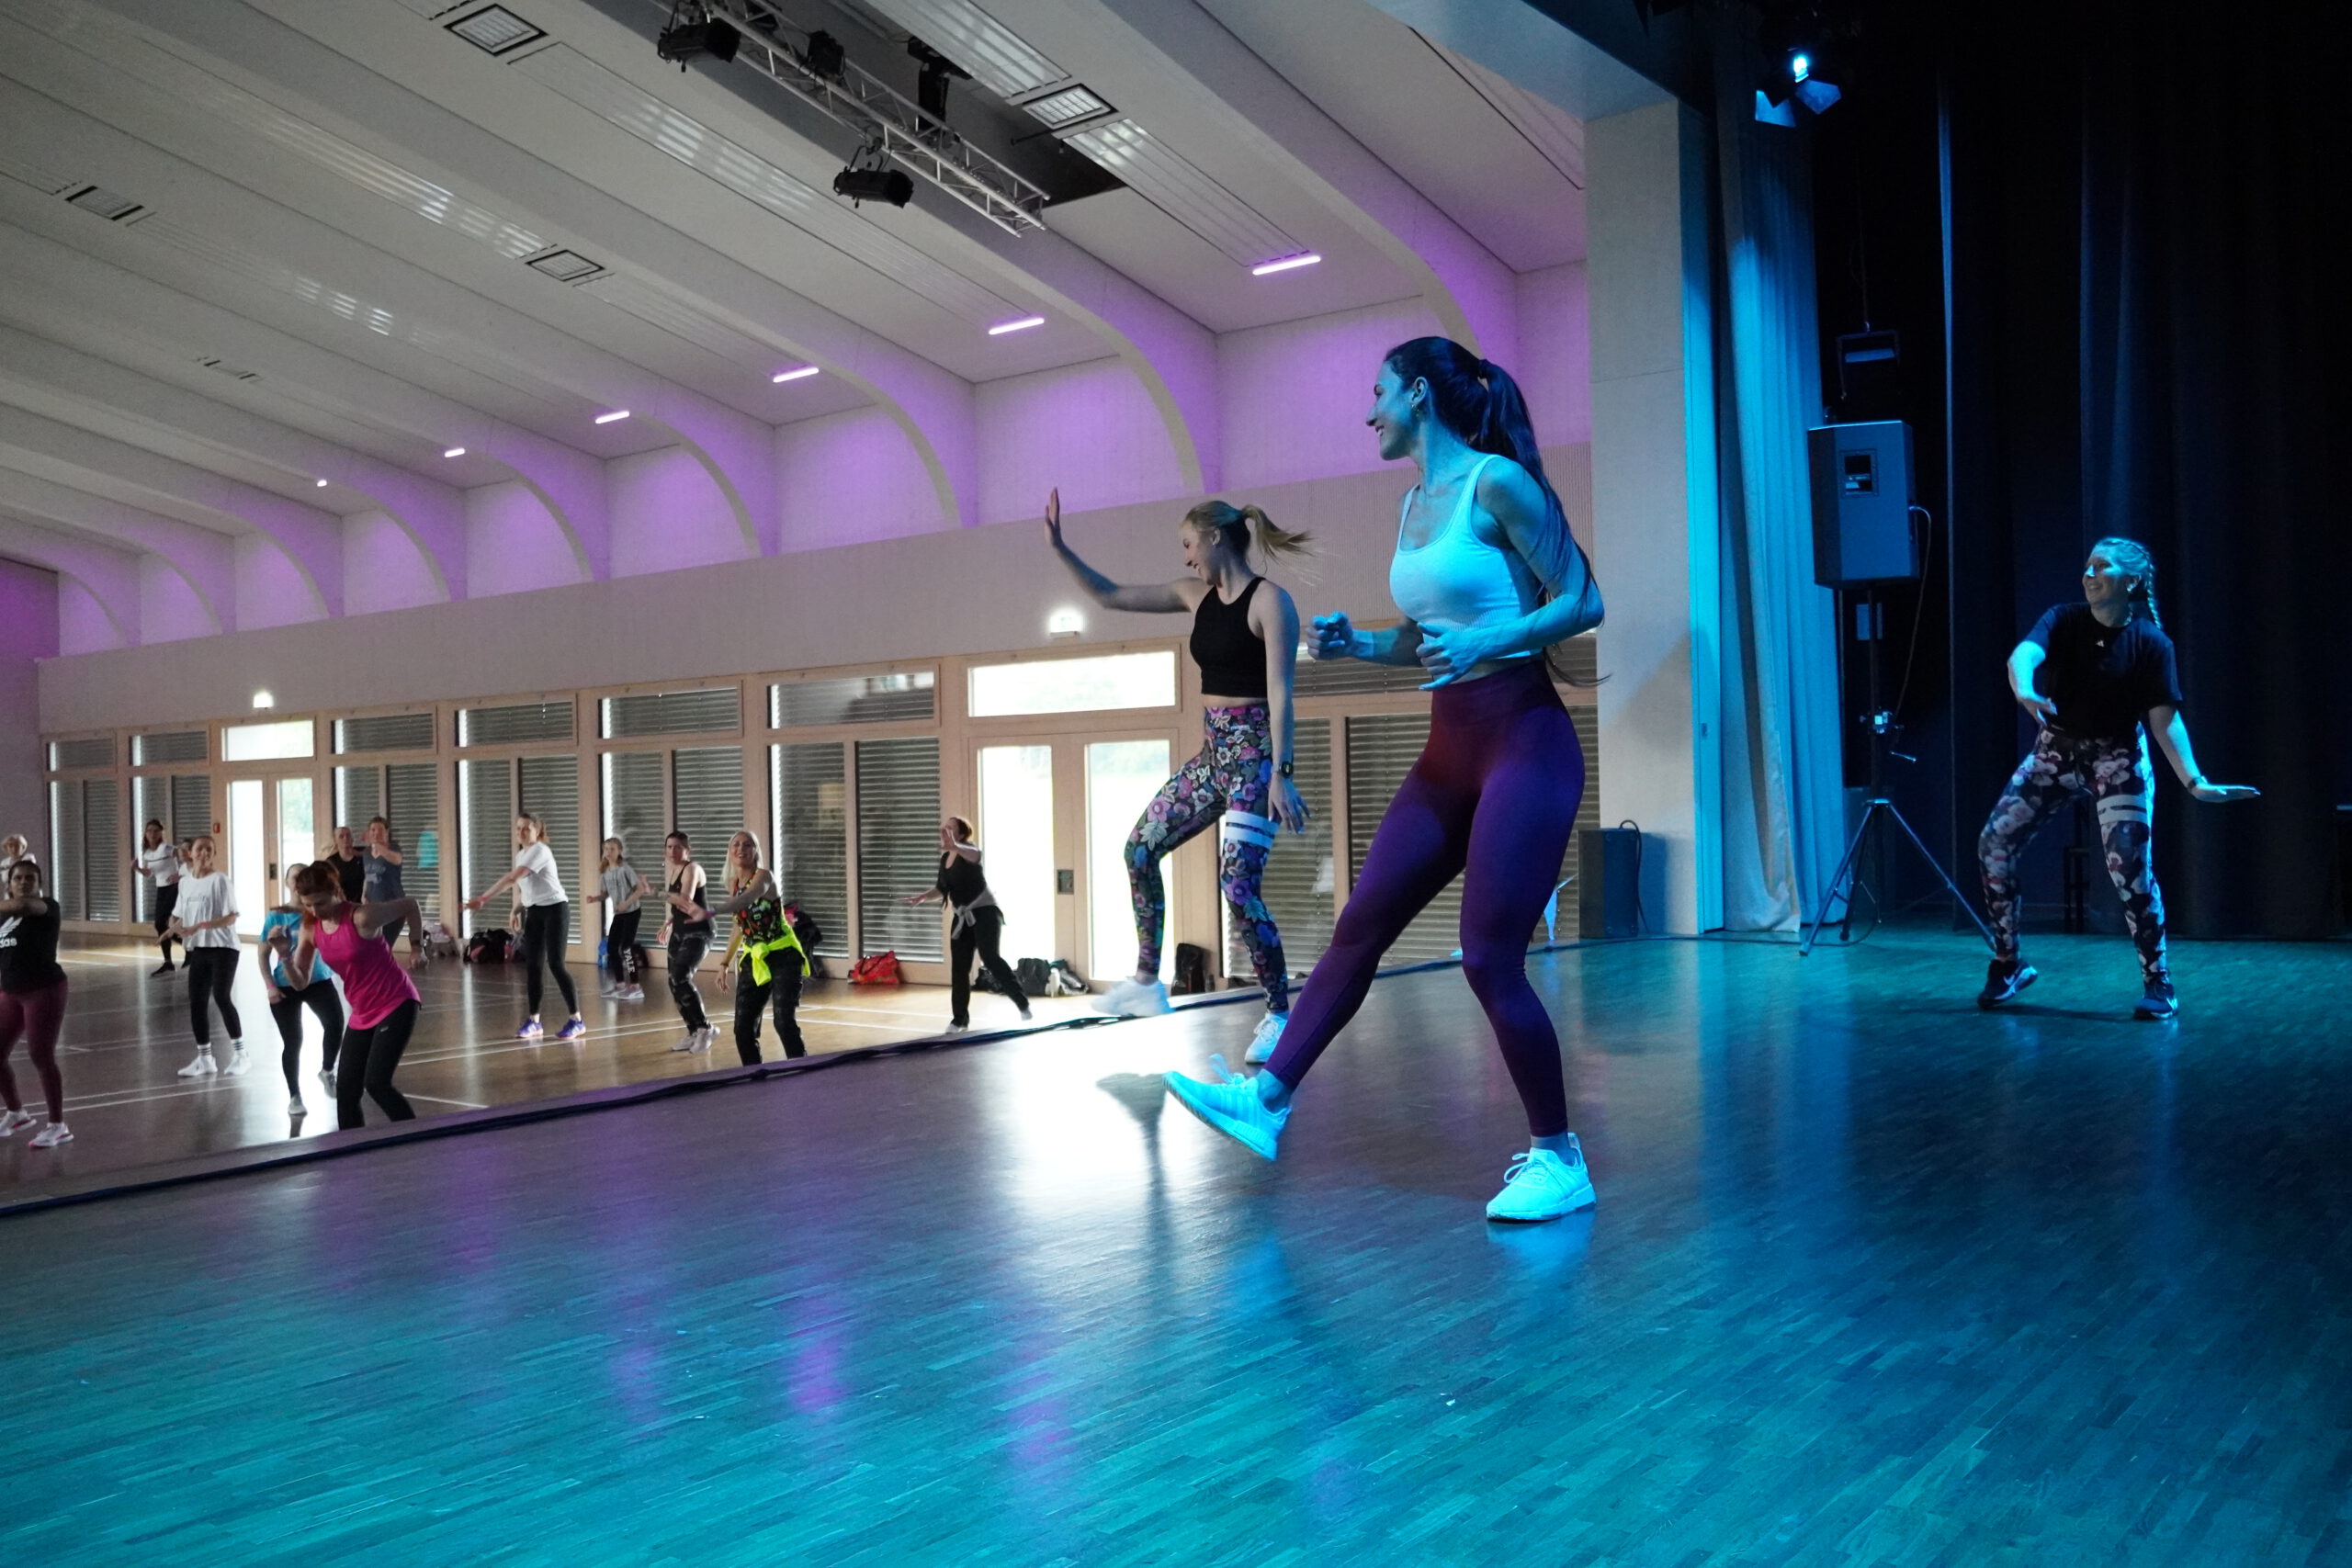 Unsere erste Charity PartyZumba Party beim TSV Musberg